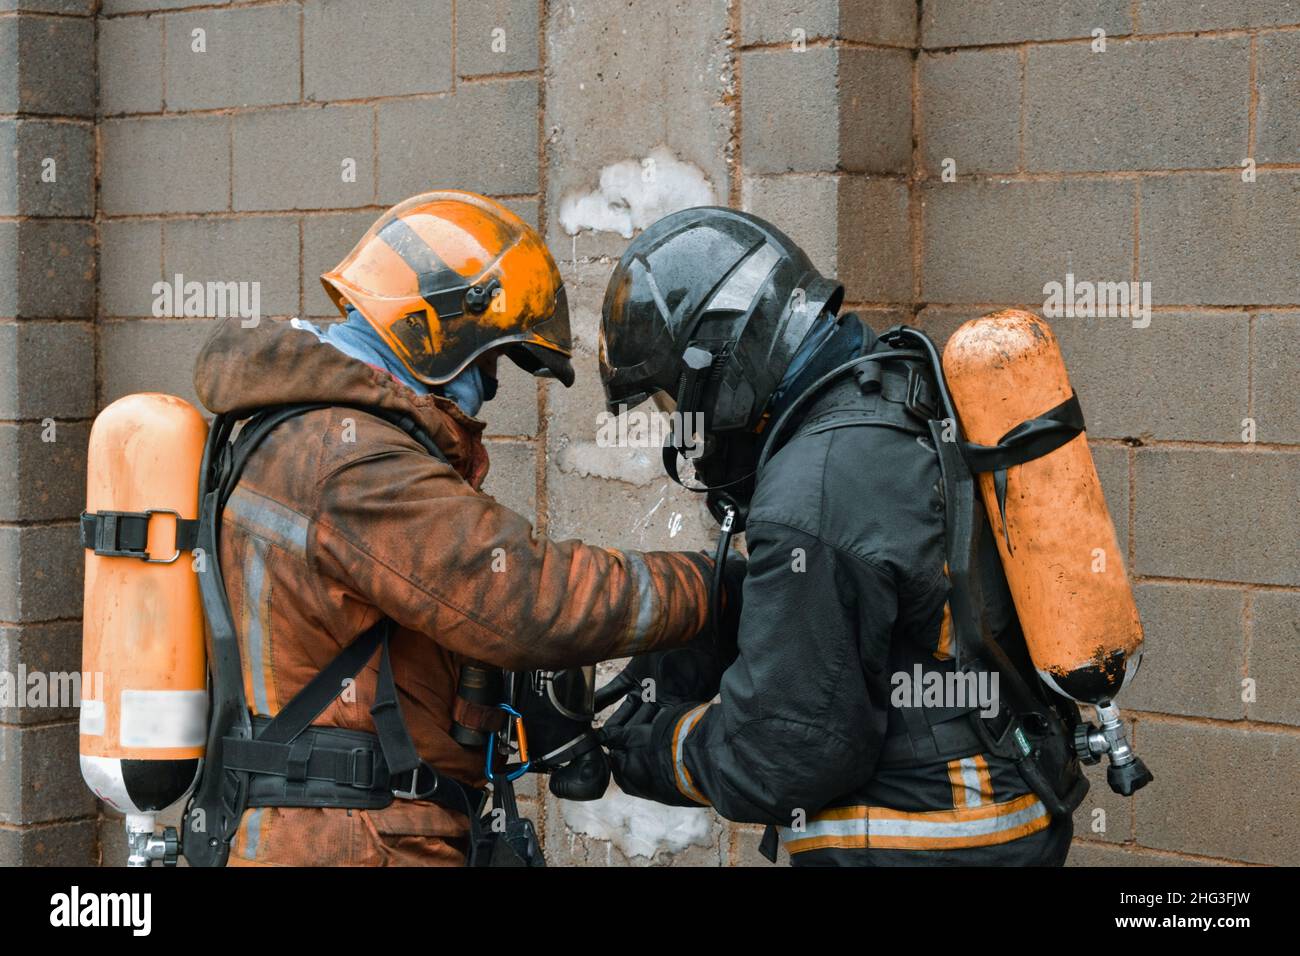 Group of firefighters getting ready for a rescue in a structure surrounded by smoke Stock Photo